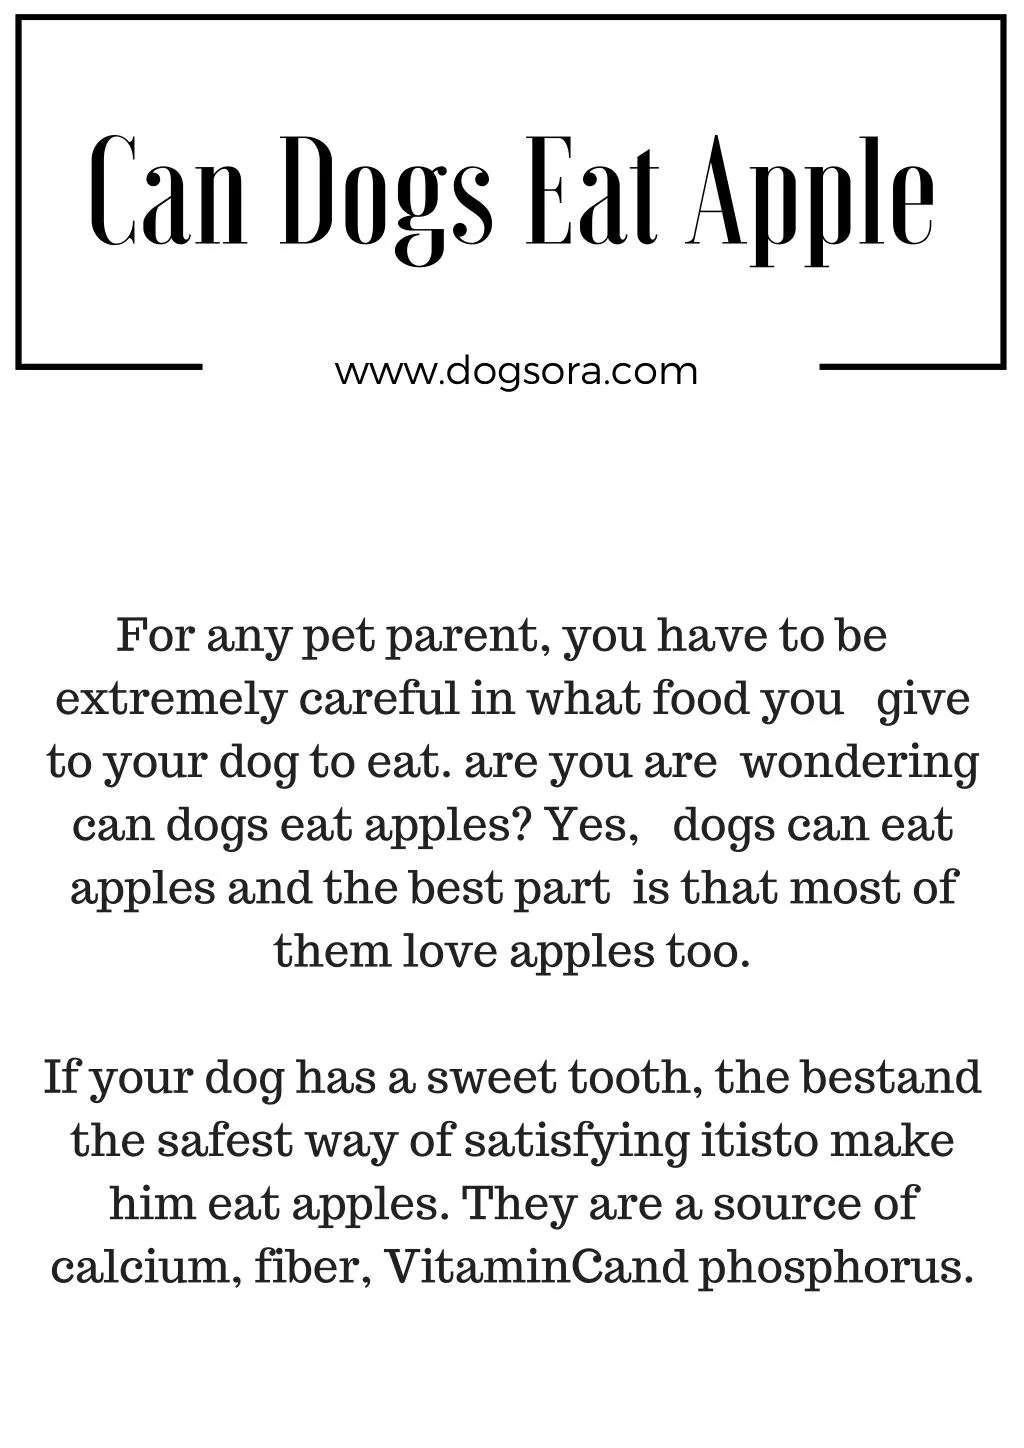 can dogs ea t apple